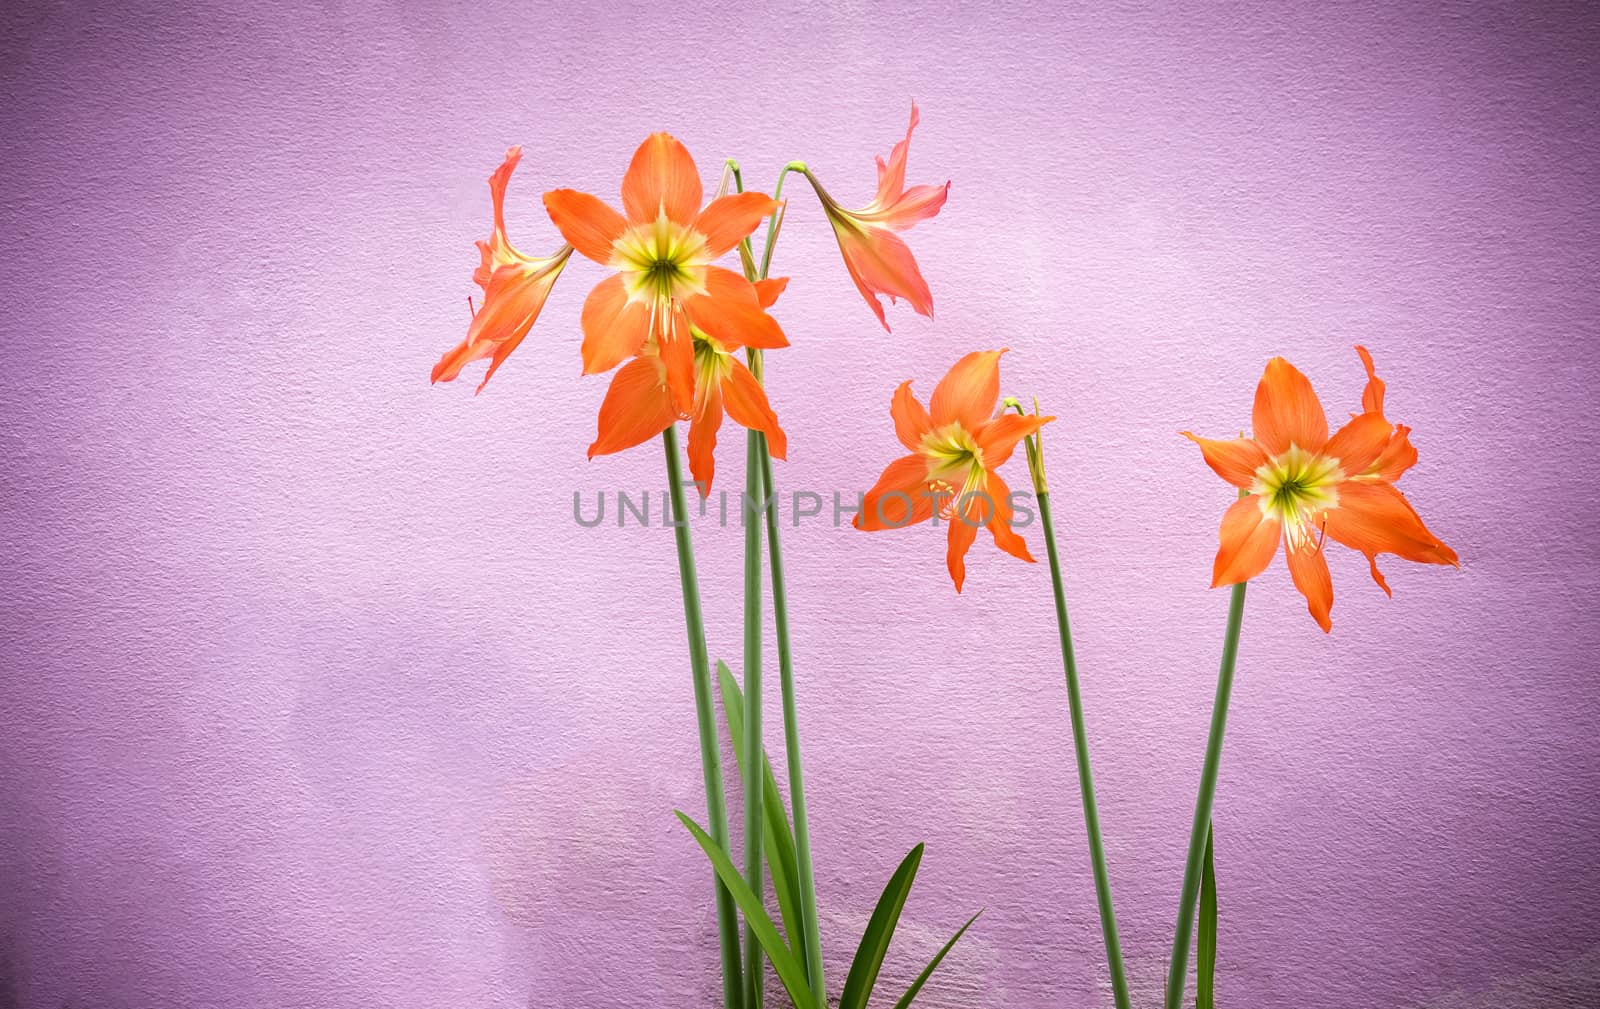 Bright orange flowers and green hues. And with a pink background.